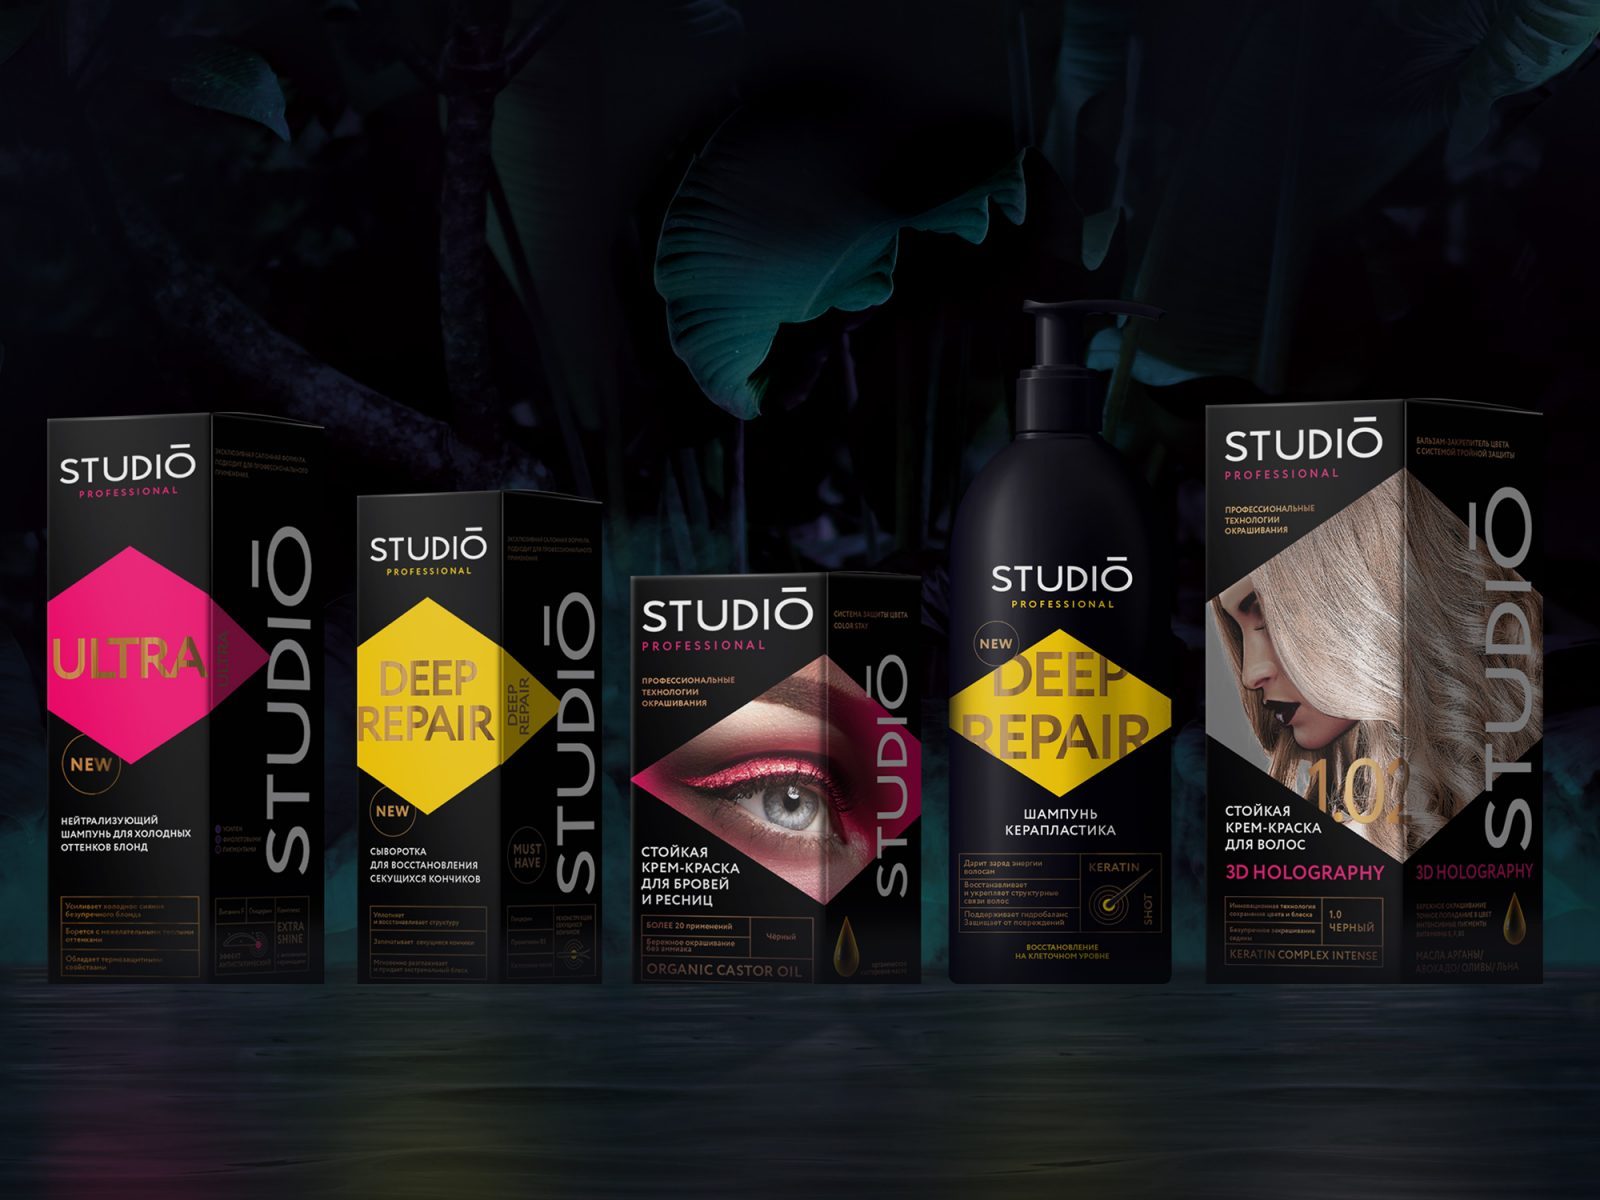 Depot WPF helps Studio Communicate Brand Message of “Professionally” means “Affordable”